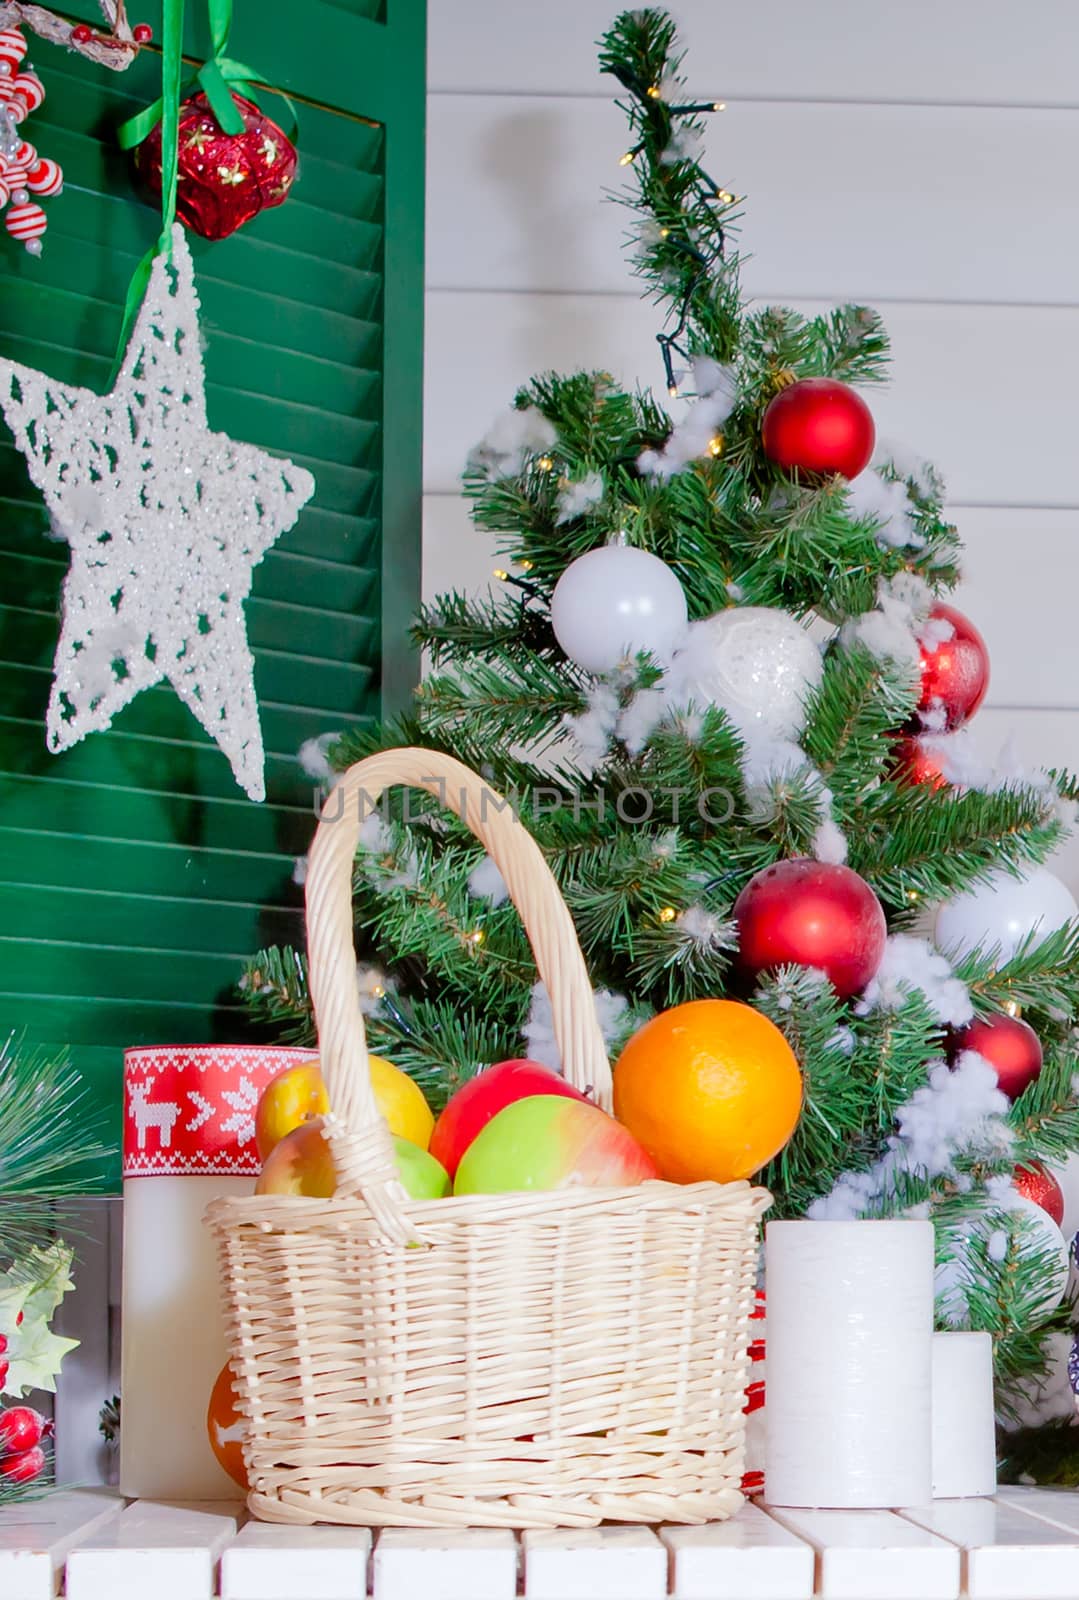 A basket of fruit on the background of the Christmas tree and the Christmas star